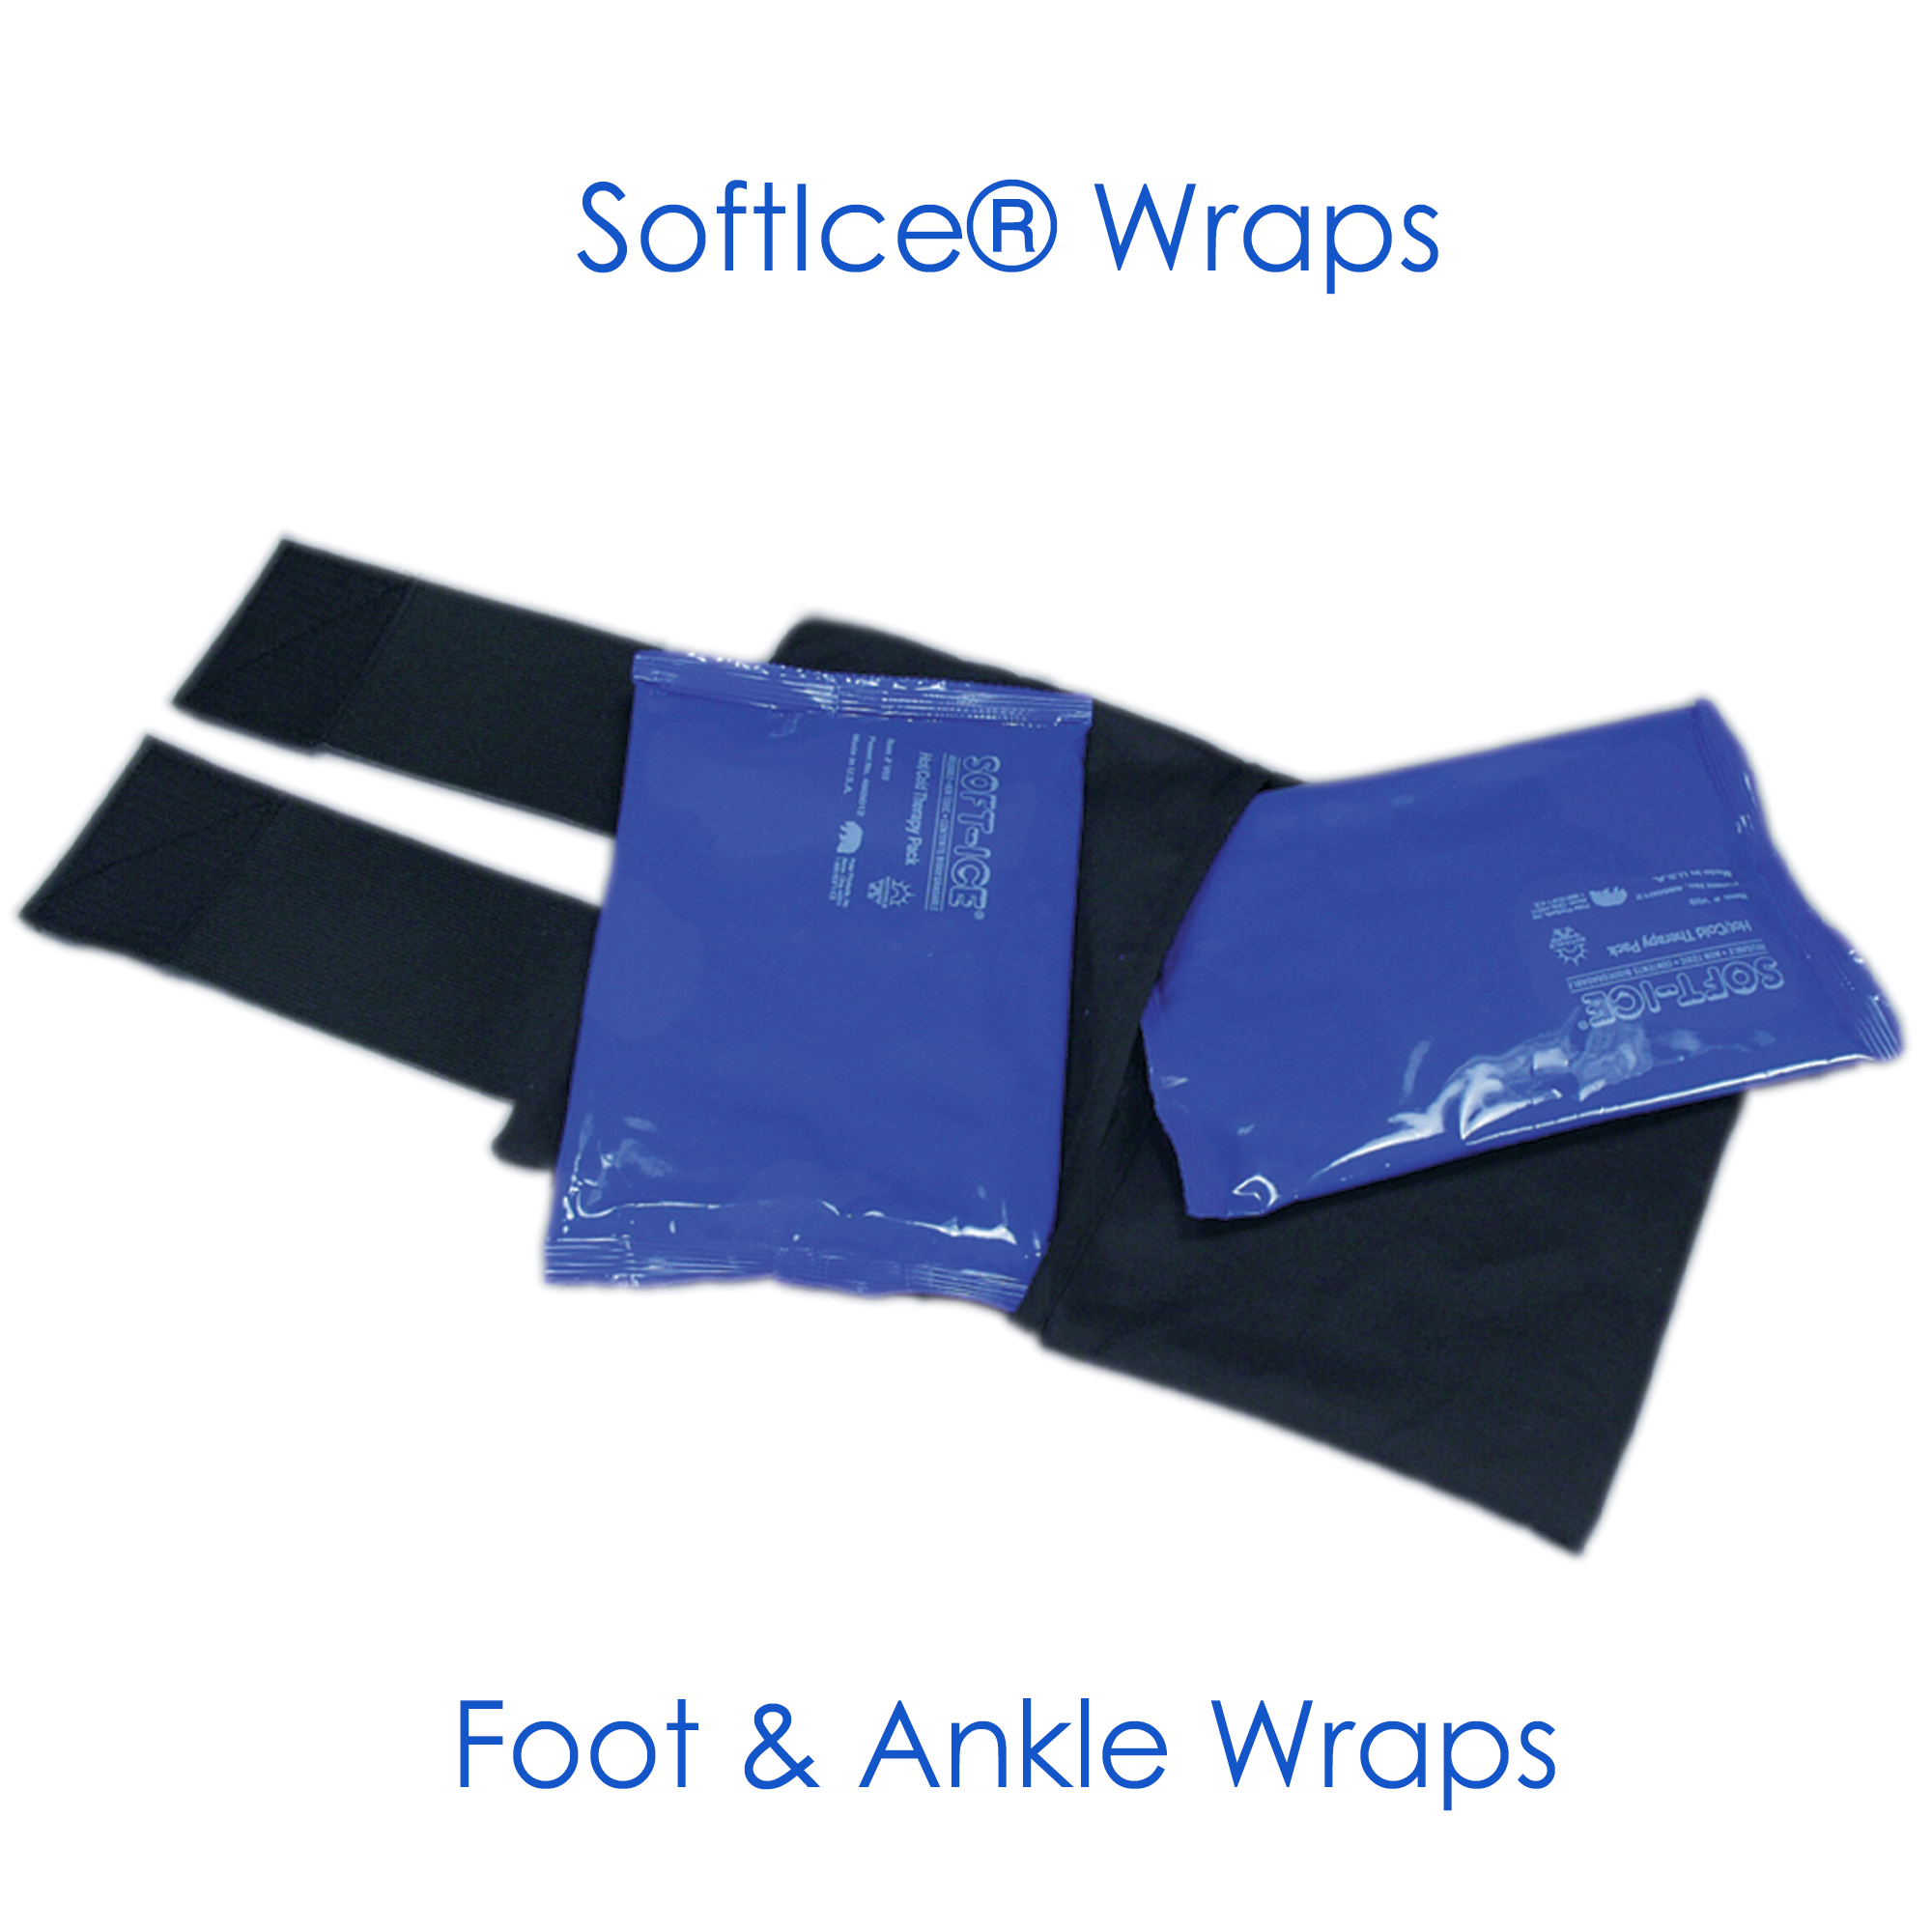 Soft Ice wrap with soft ice packs laying on top 